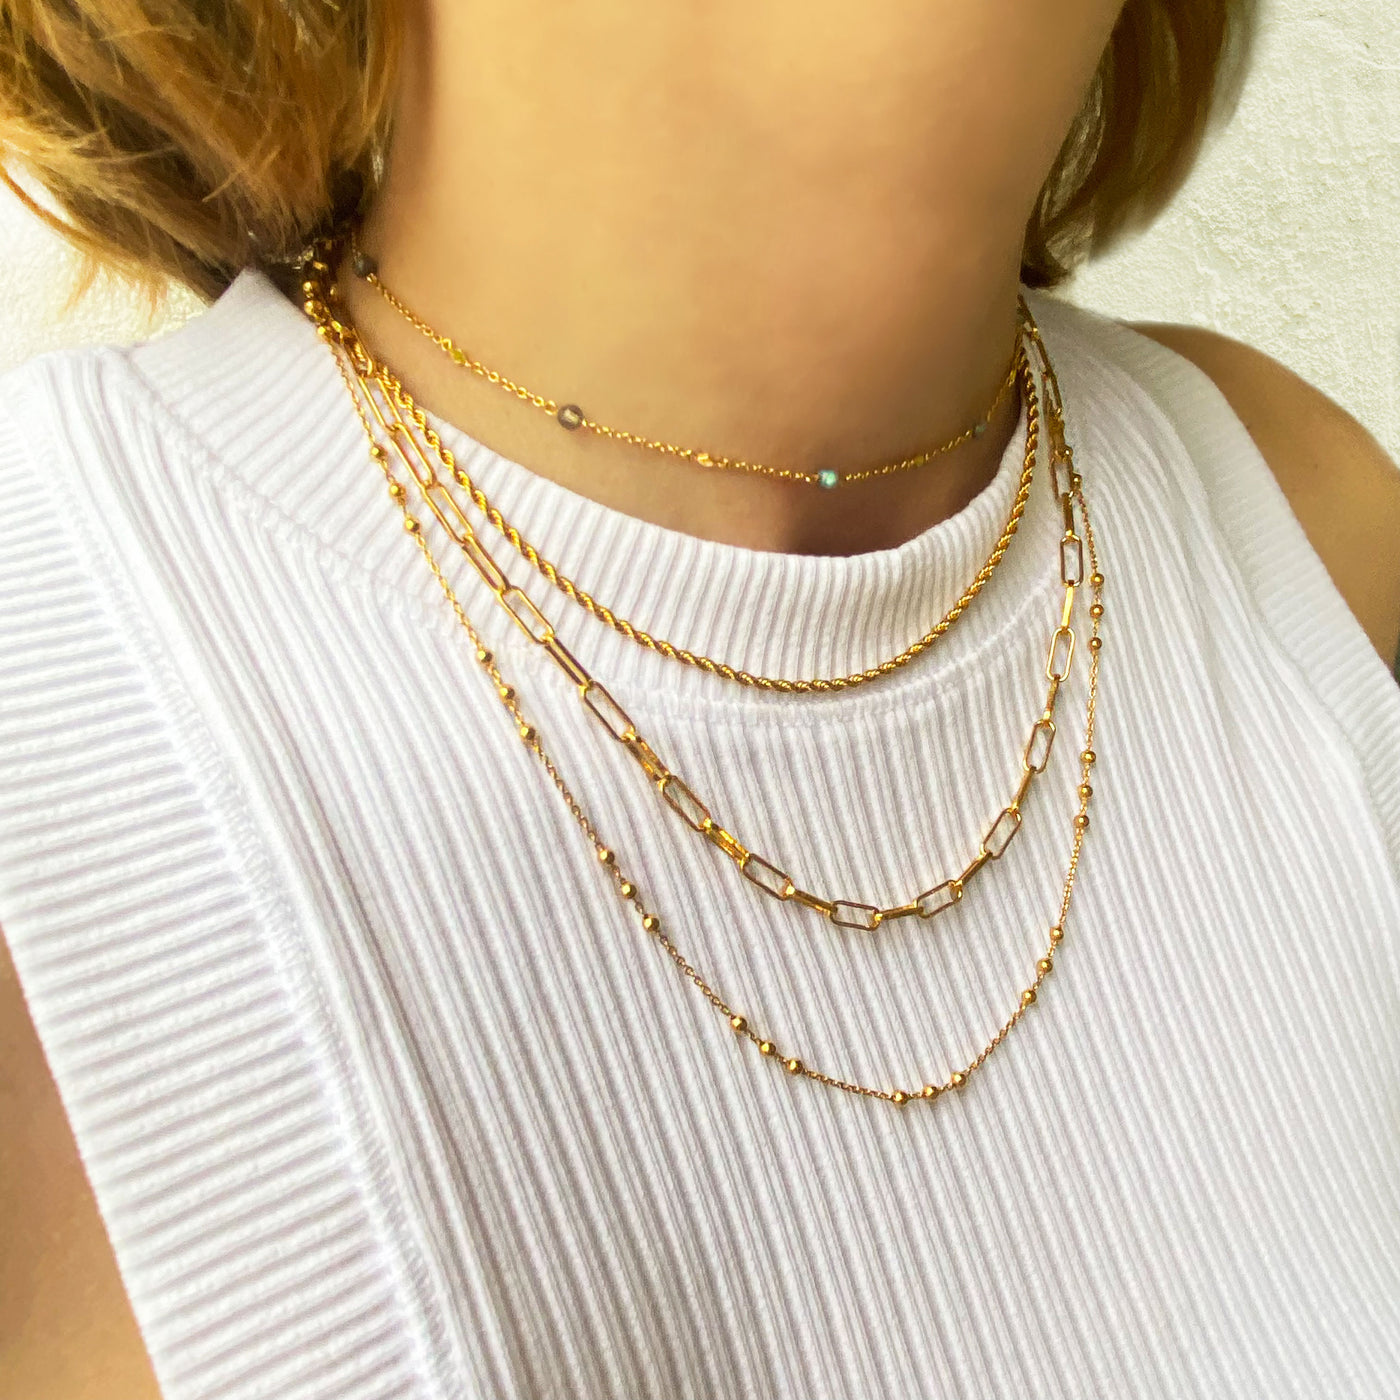 Gold layered necklaces with labradorite choker, twist rope necklace, chunky chain and bobble chain